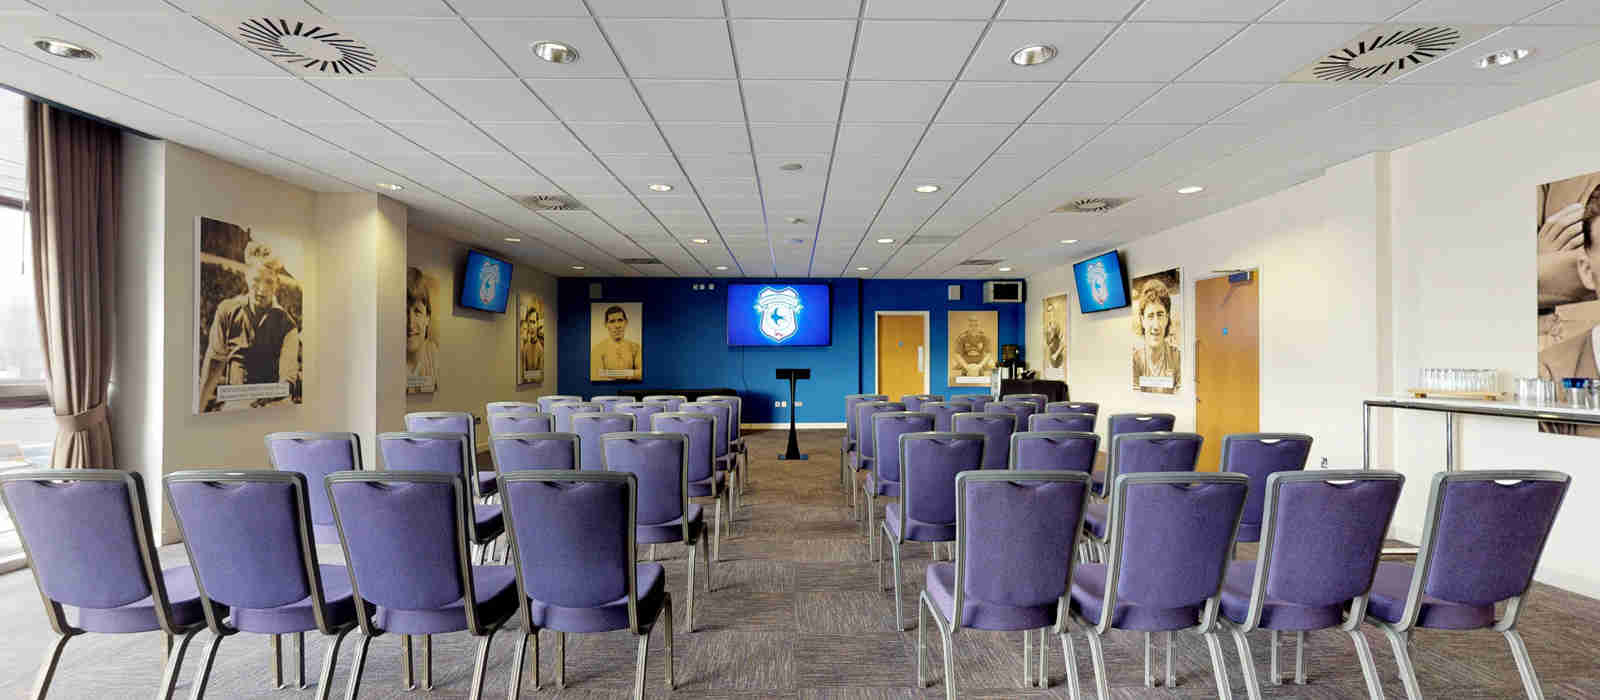 Cardiff City Meetings Events Captains Lounge Theatre(1)